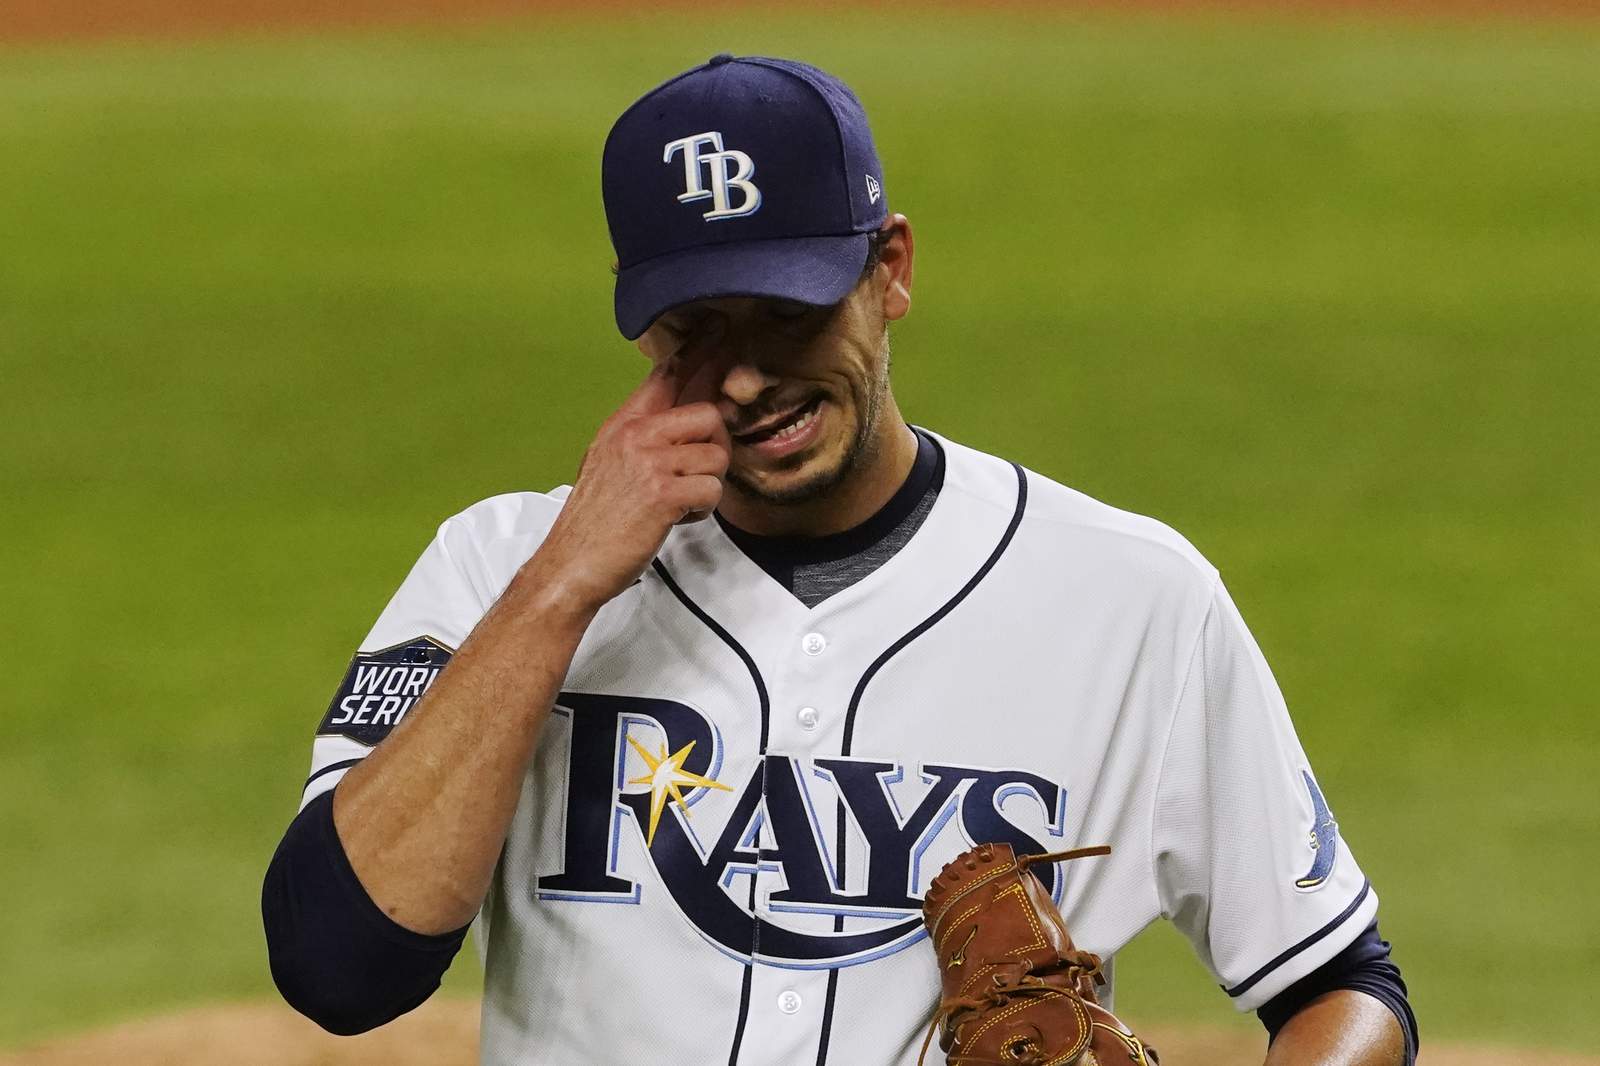 World Series notes: Rays chase Game 7, one more for Morton